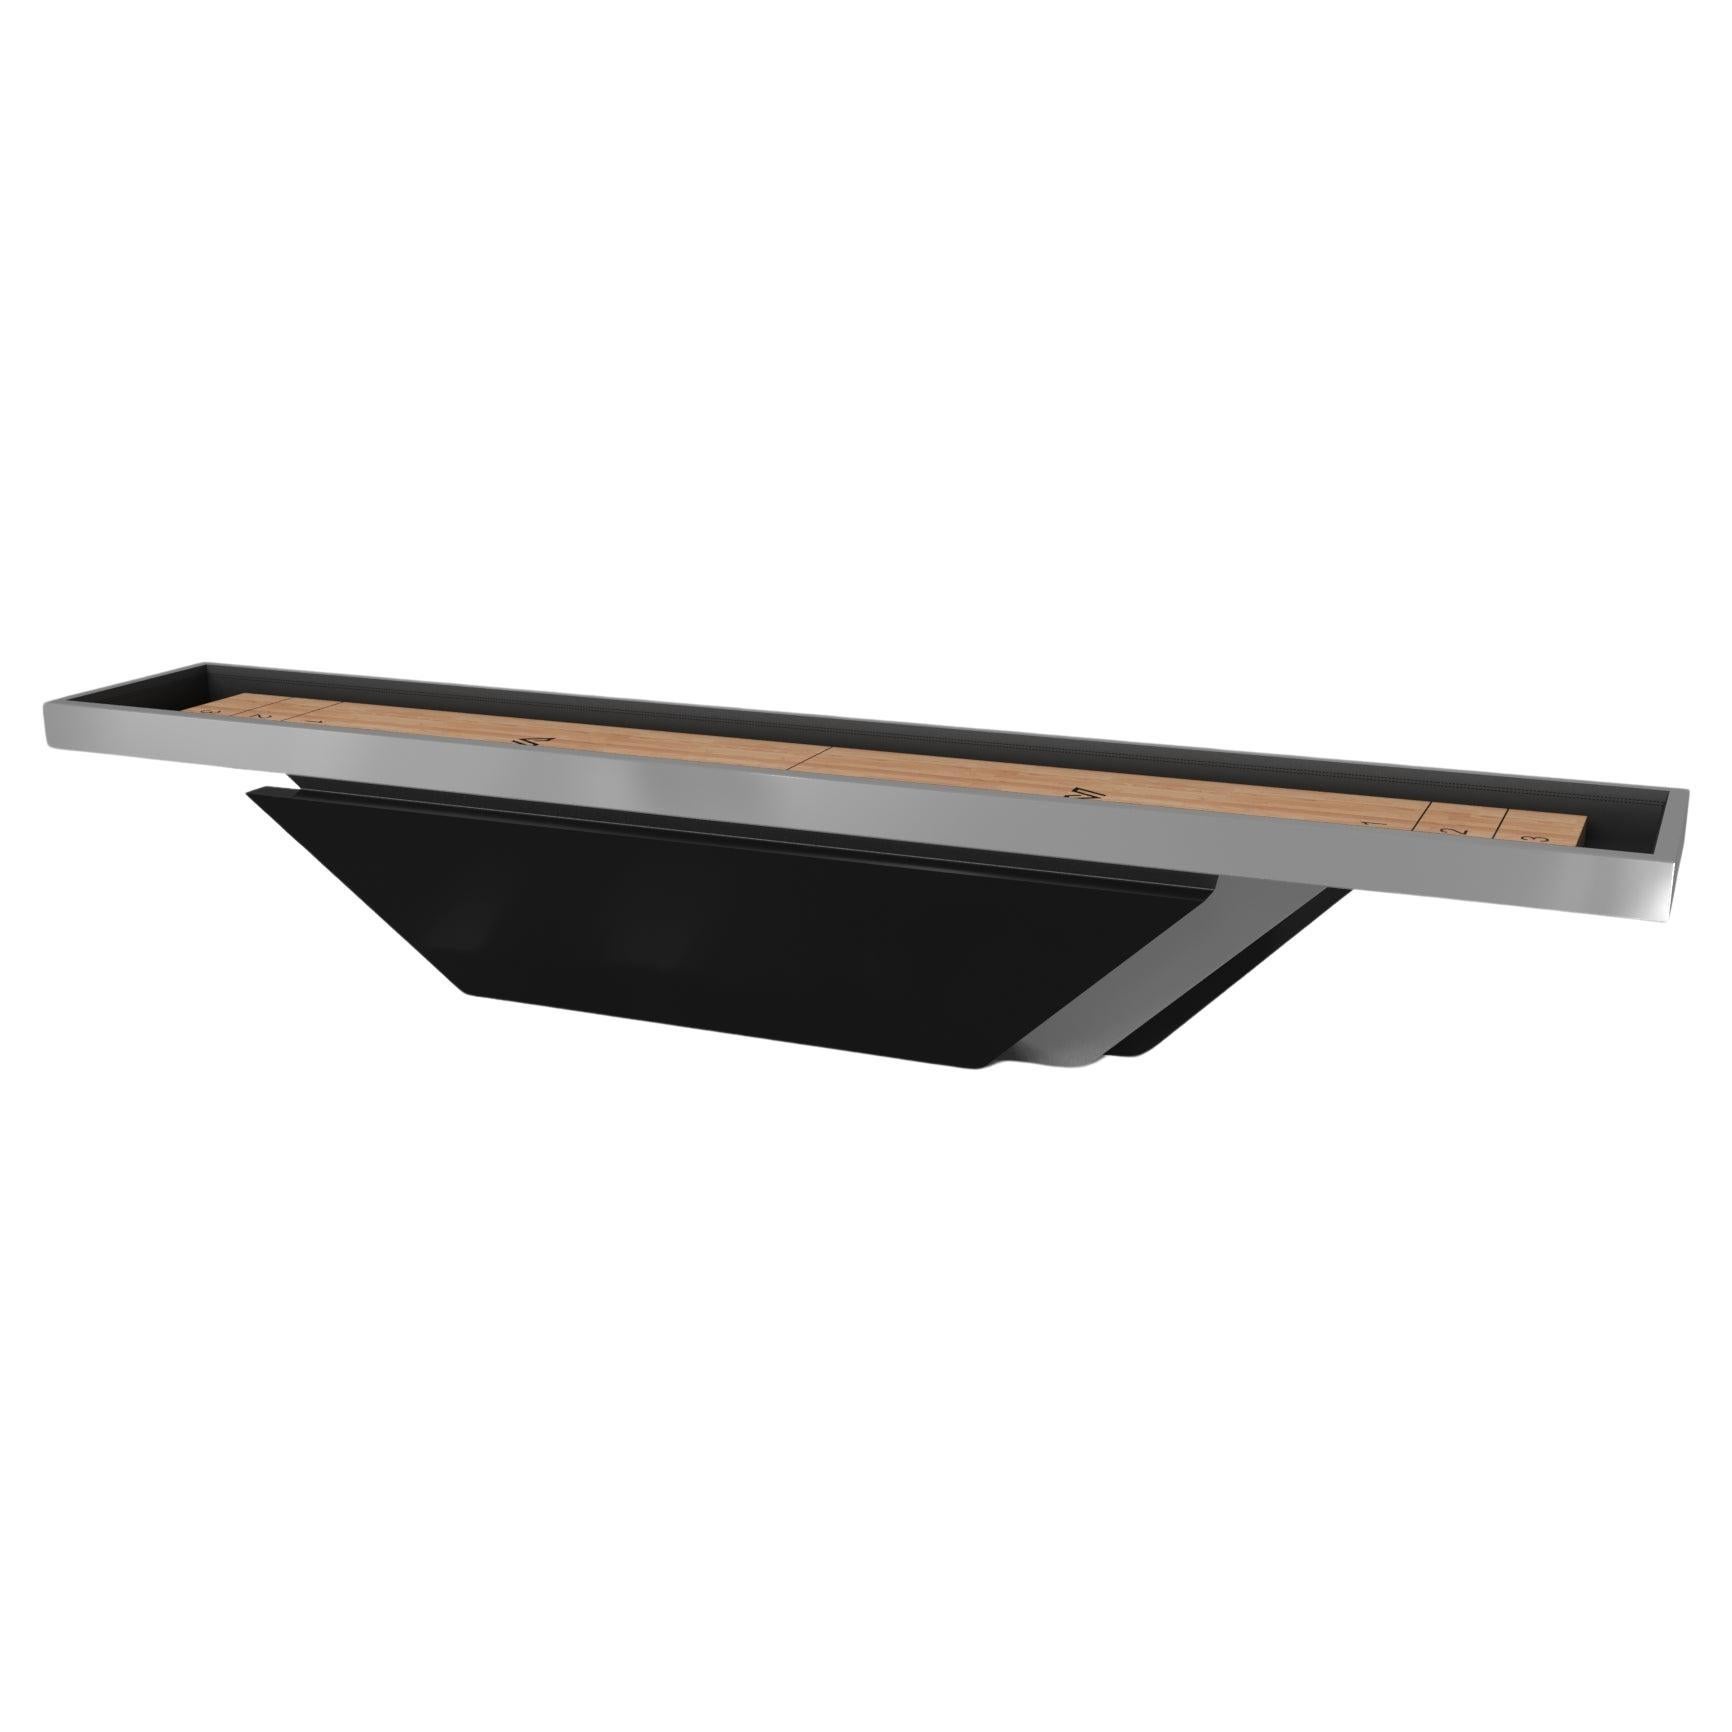 Elevate Customs Vogue Shuffleboard Tables/Stainless Steel Sheet Metal in 22'-USA